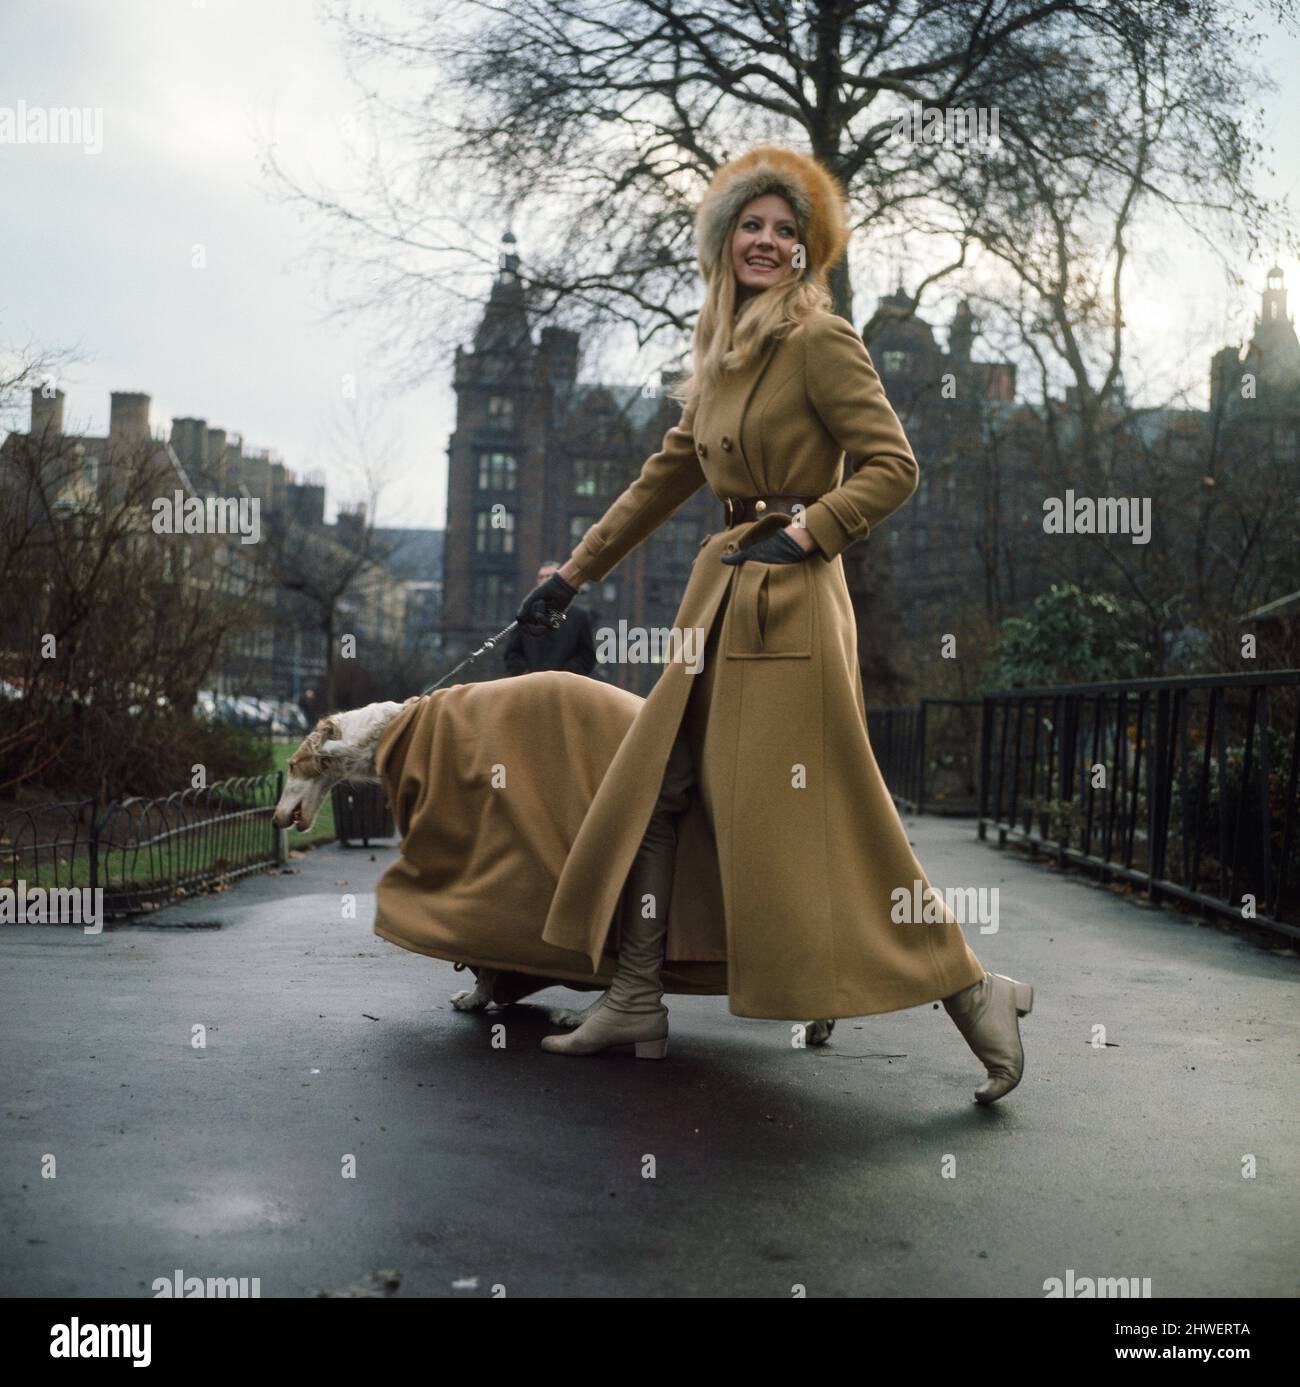 The first maxi coat for dogs gets its maiden outing in London with model Vicki Hodge and three-year-old Borzoi Sneshok Sokolova (known as Kika to her friends). Vicki's coat is by Elgee of London. January 1970. Stock Photo